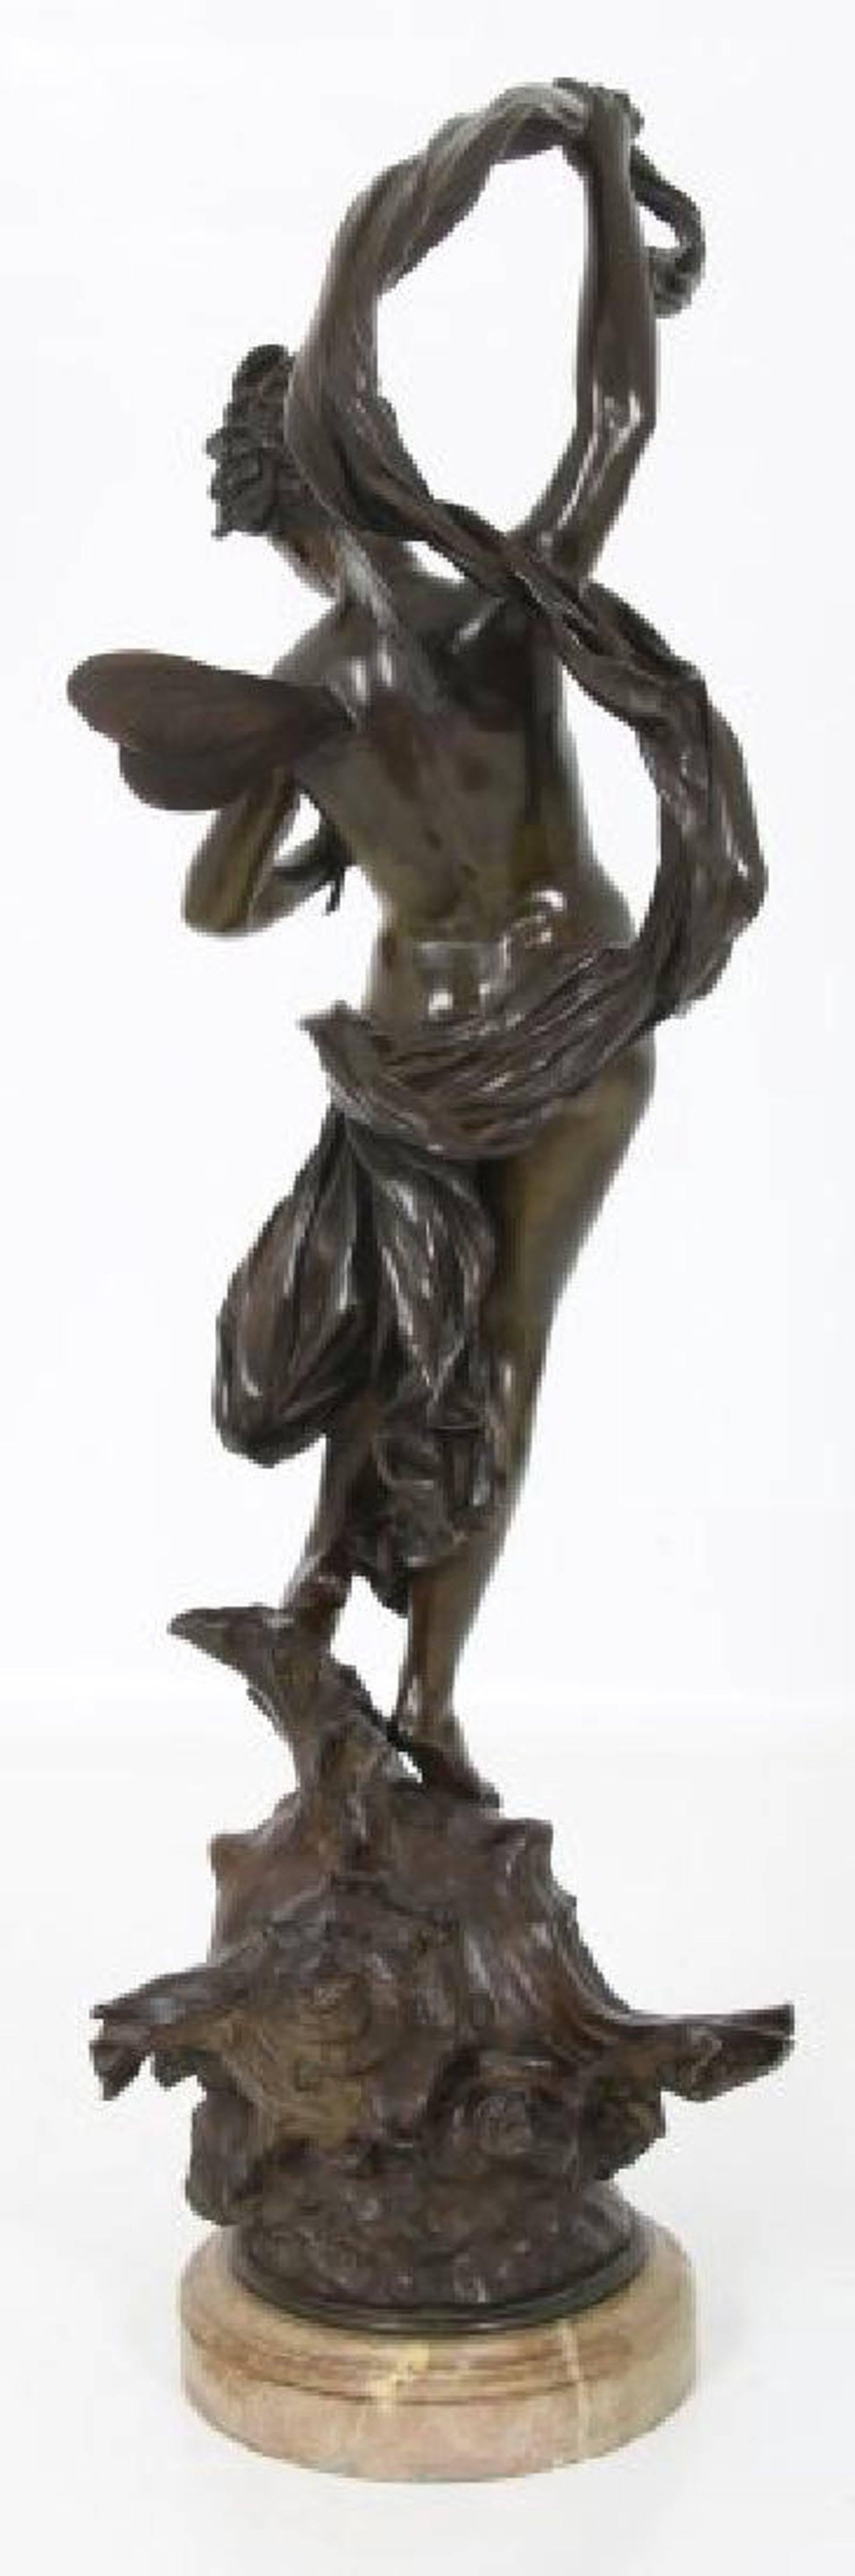 Luca Madrassi (French, 1848-1919) a very fine and large French 19th century Belle Époque bronze sculpture titled 